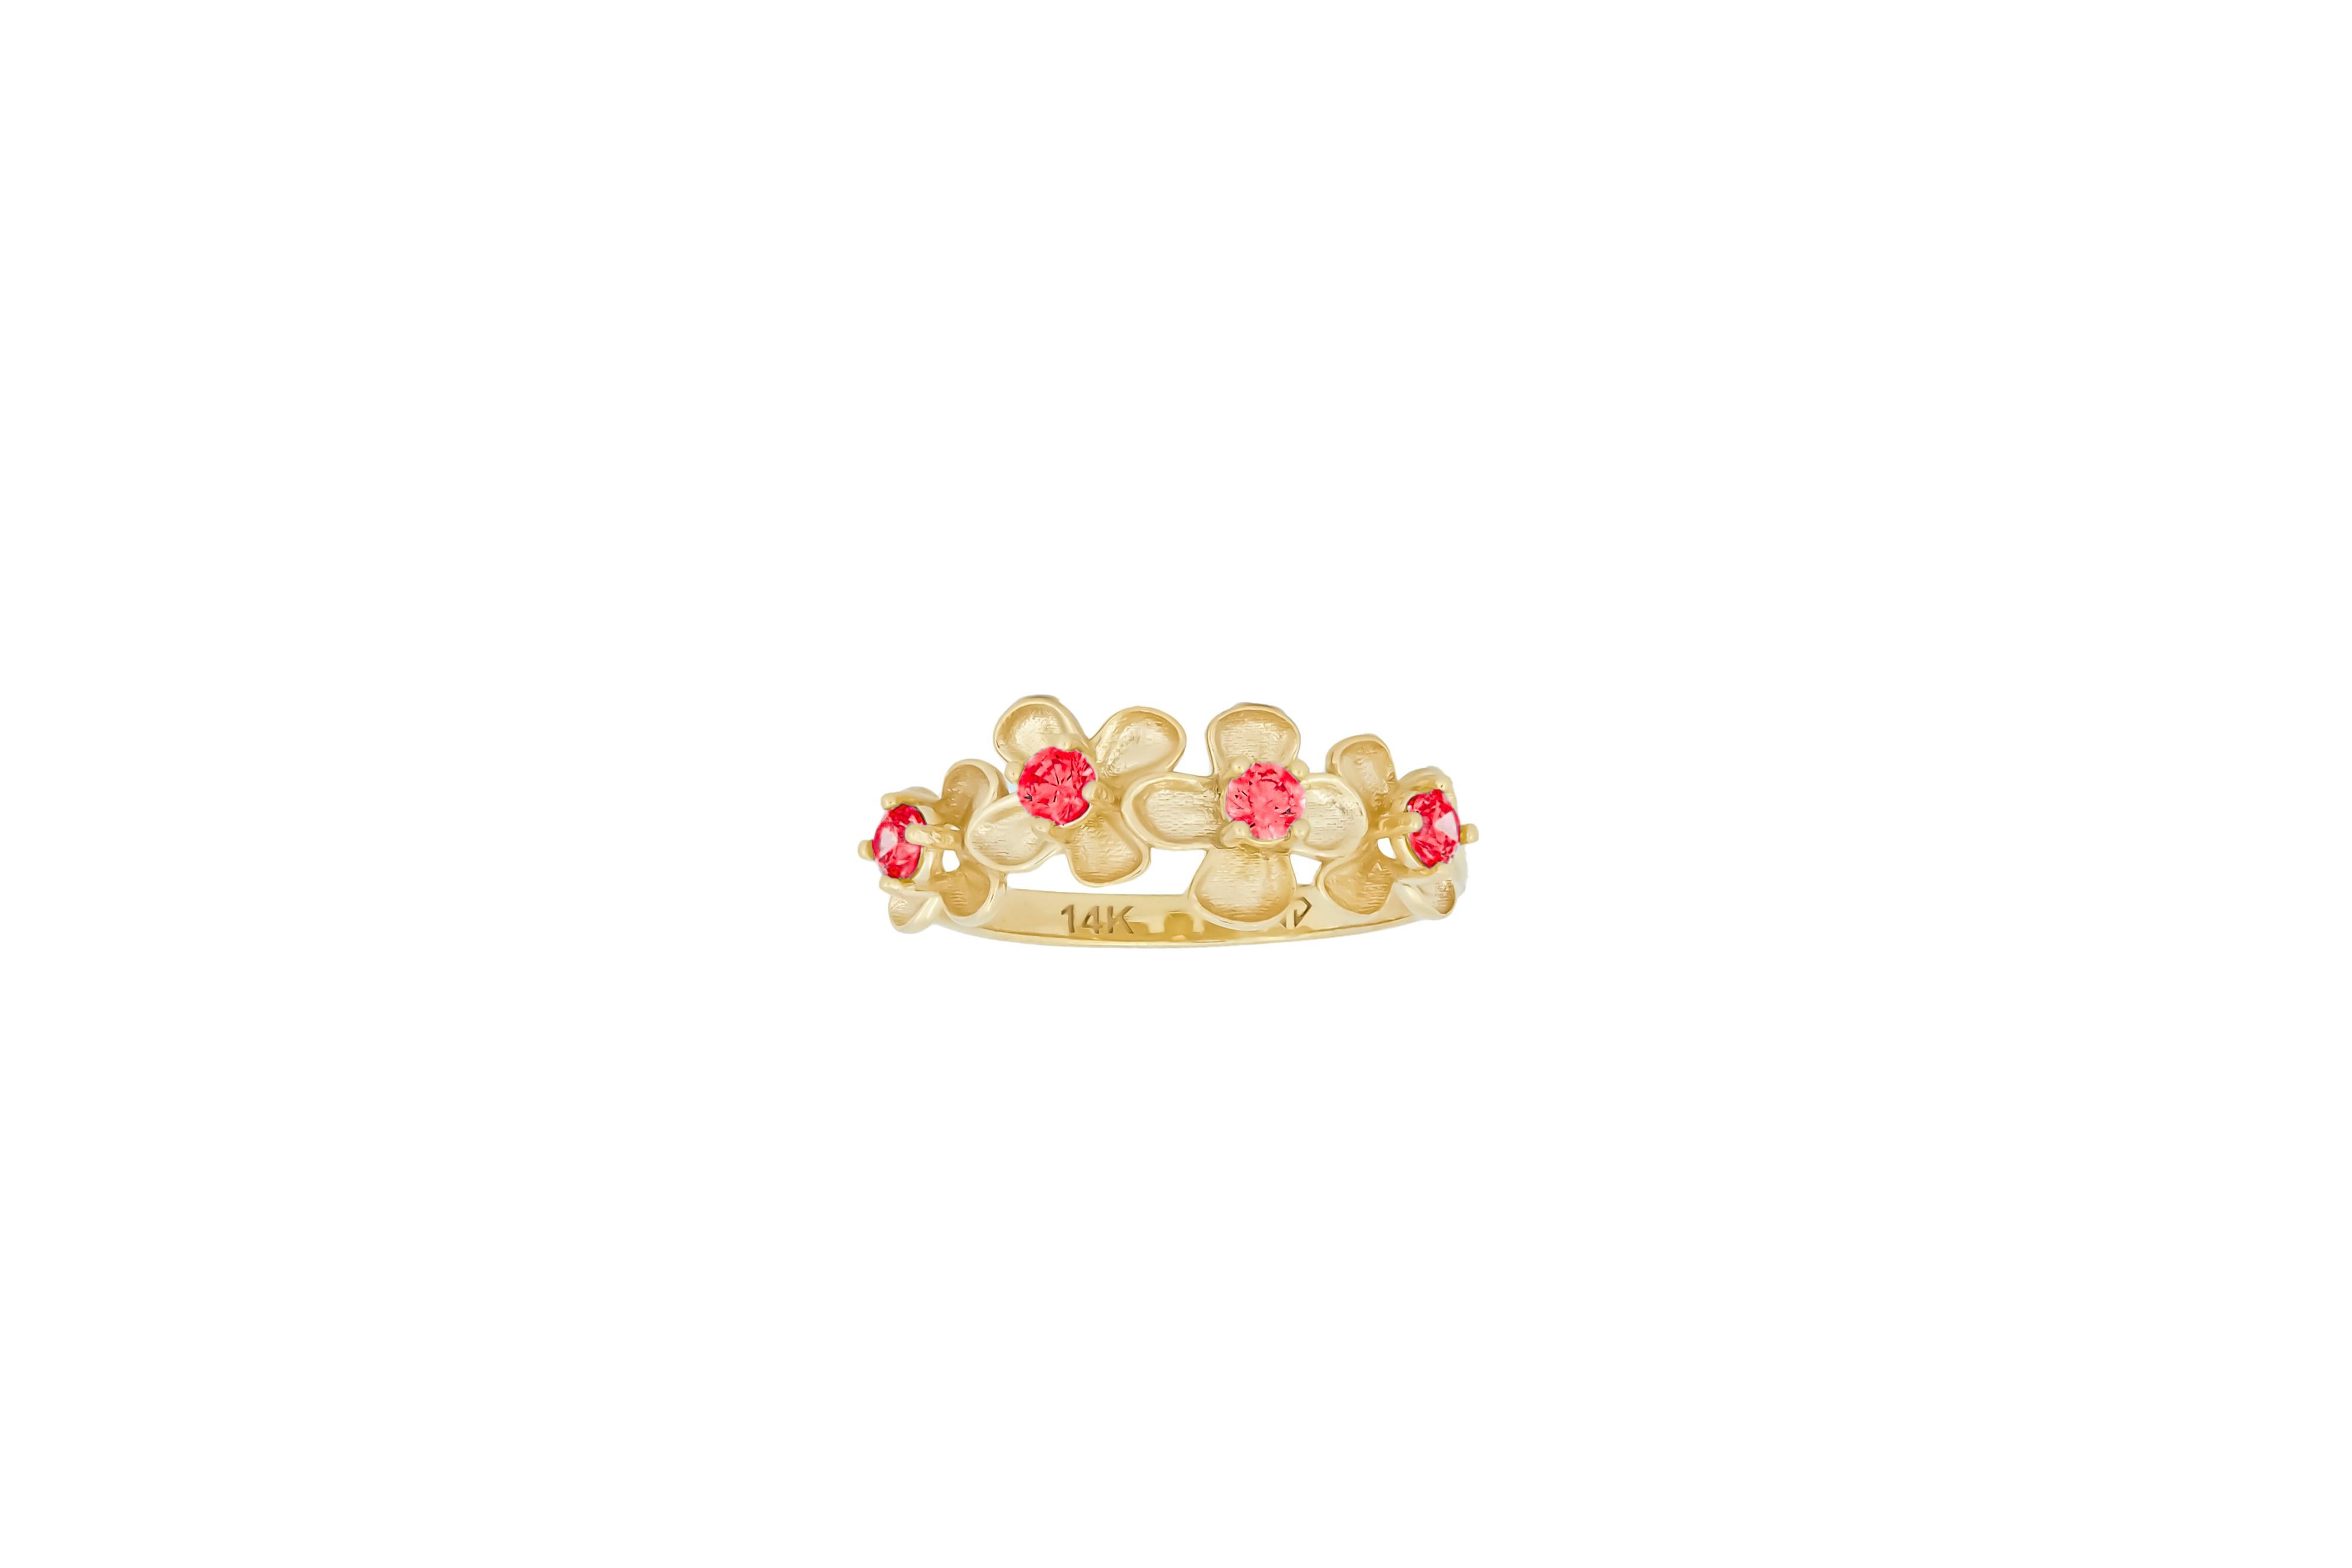 Flower 14k gold ring
Lab Pink ruby 14k gold ring. Daisy flower gold ring. Flower bouquet ring. Pink  gemstone ring.

Metal: 14k solid gold
Weight: 2 gr depends from size

Gemstones:
Set with lab ruby
Color - pink, 
Cut: round

auction